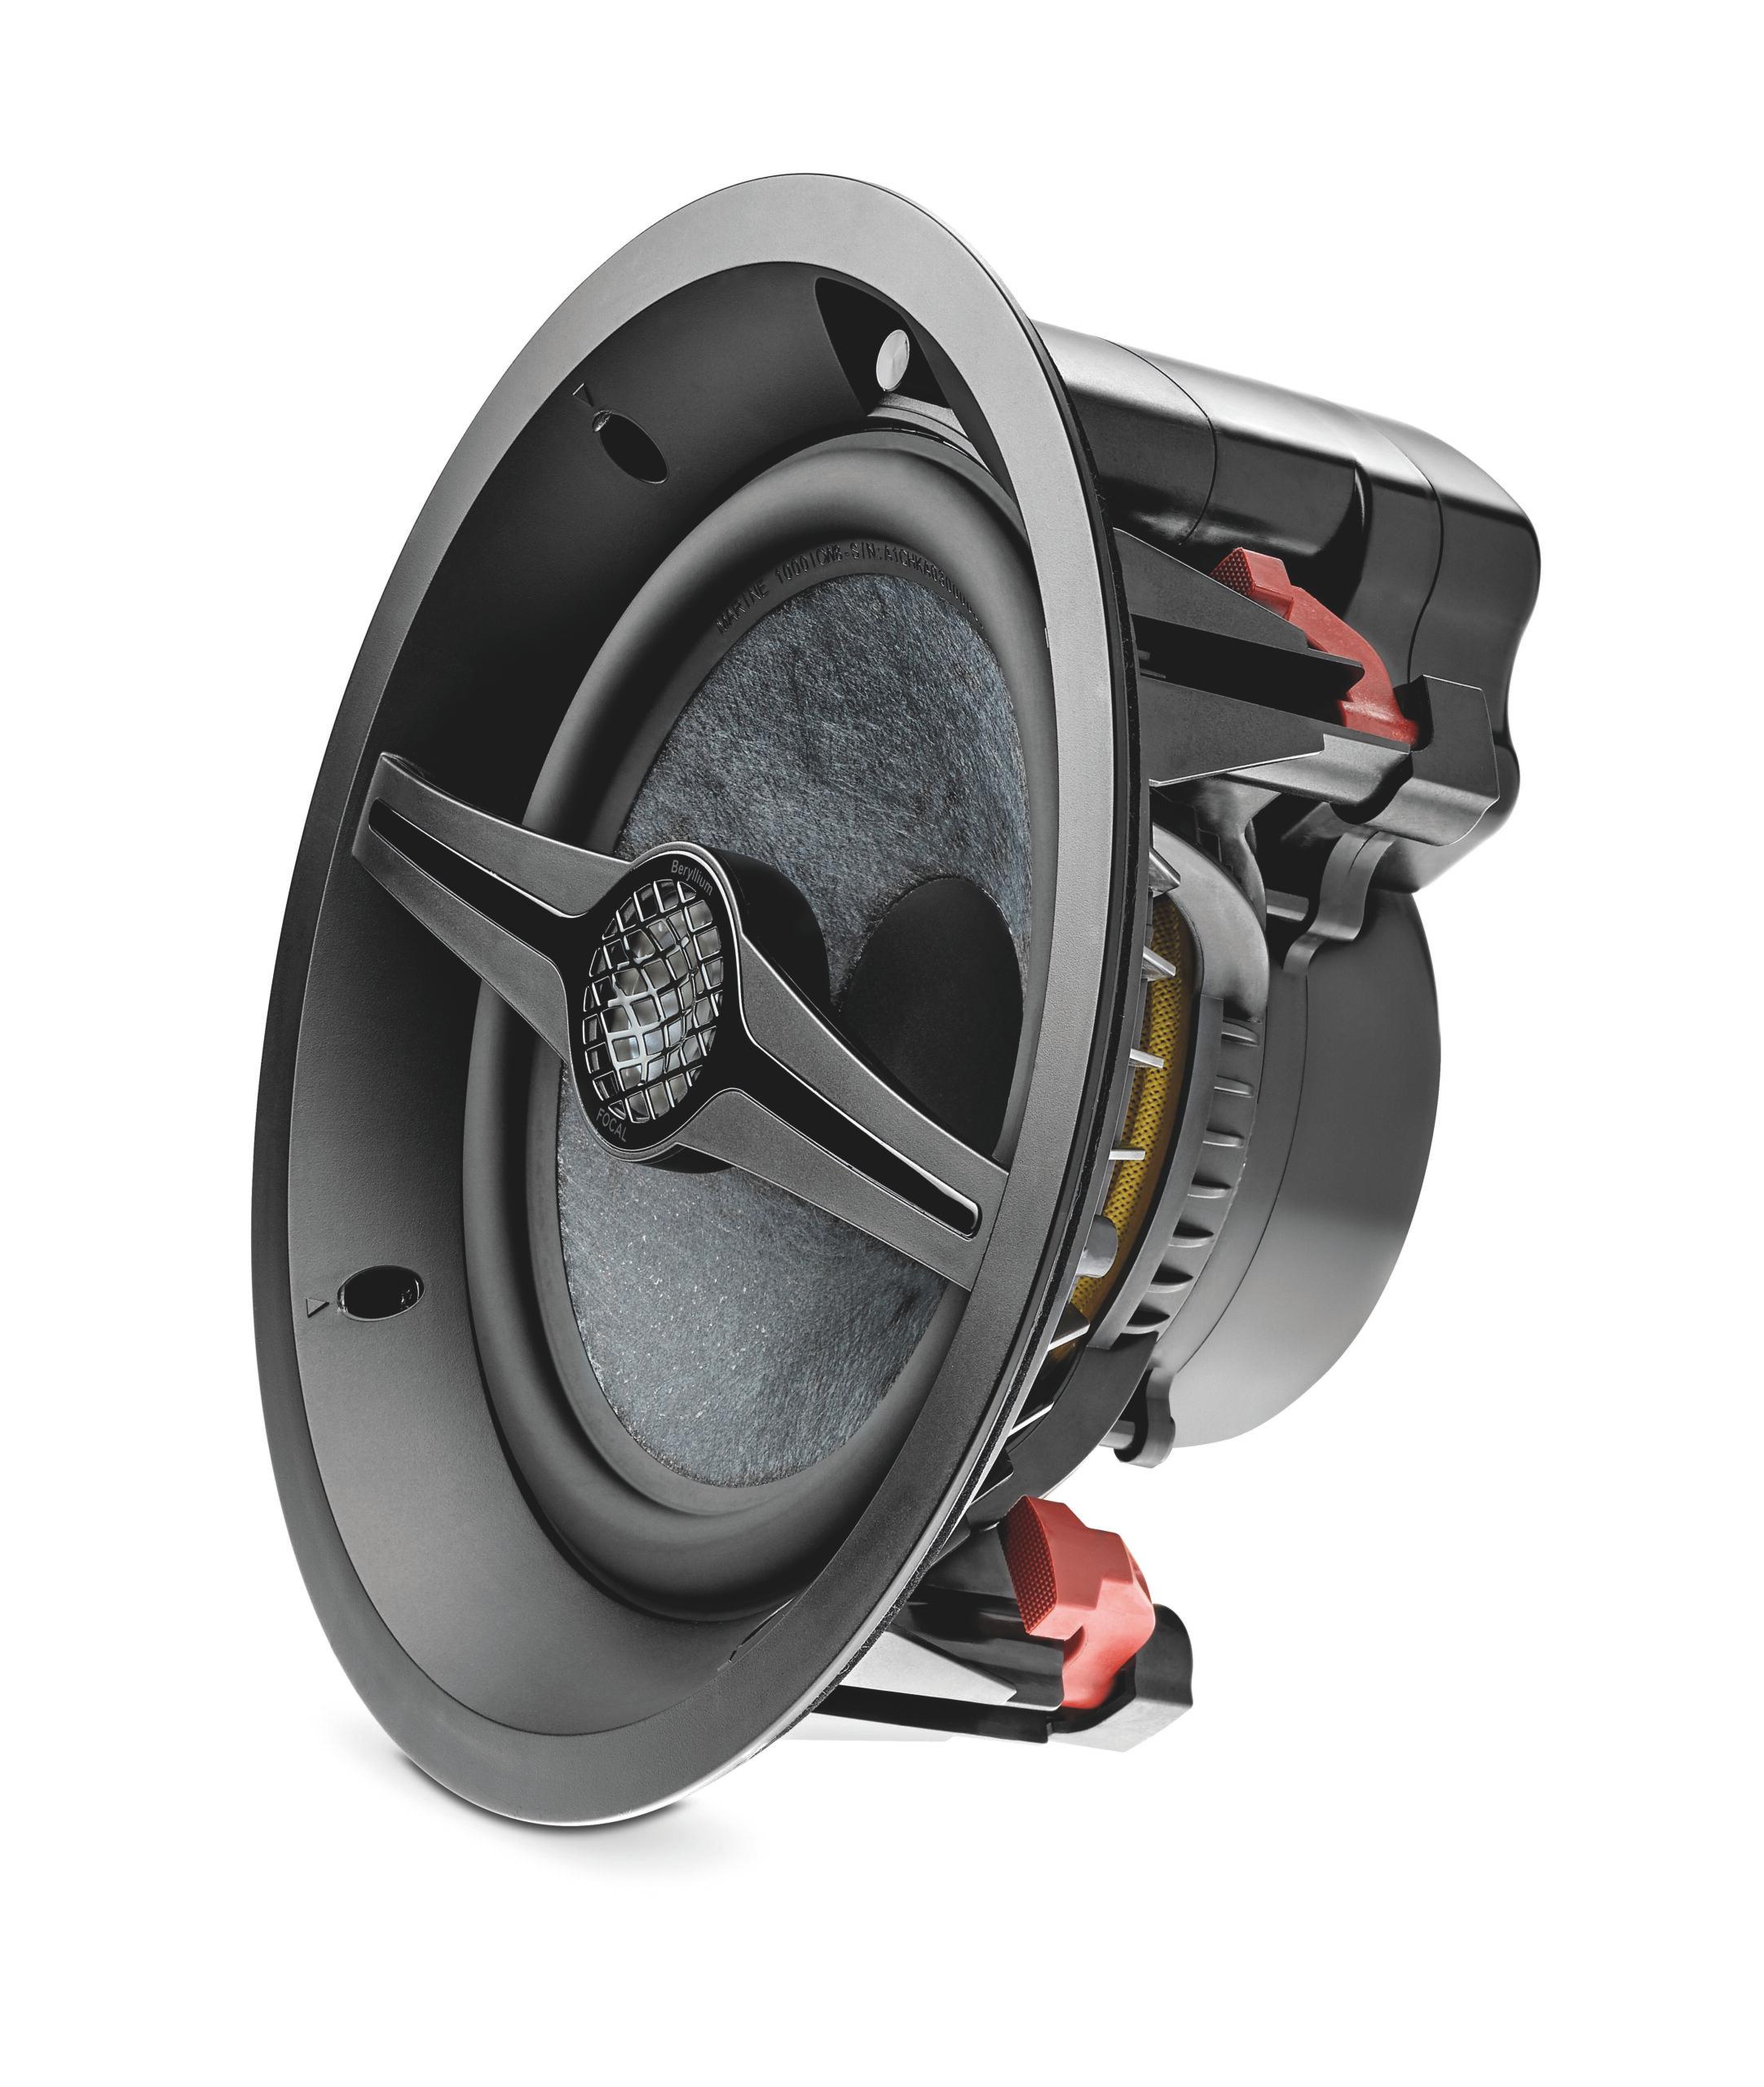 Focal's newest speaker line is designed for demanding saltwater environments, and include both full range and subwoofer models. 6ec336ce 1000 icw8 littora 34 prof scaled